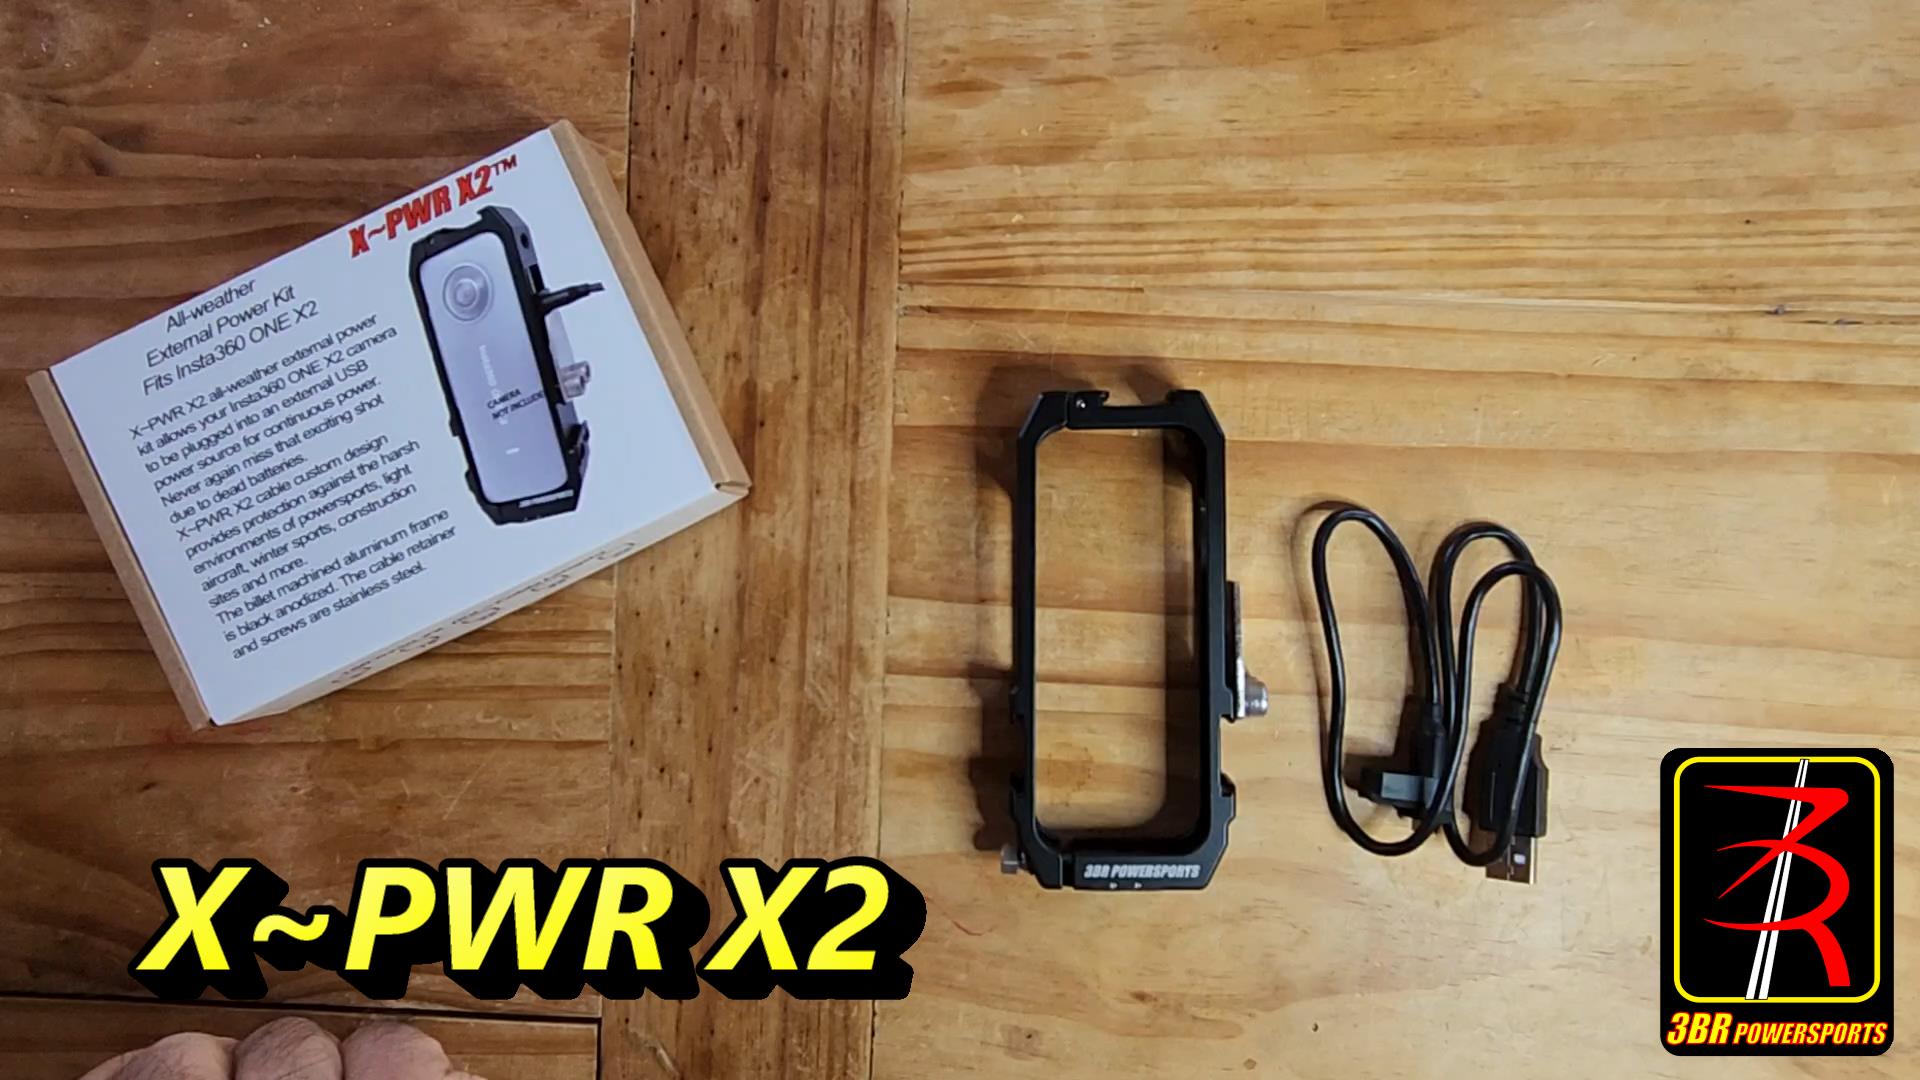 X~PWR X2 All weather External Power for Insta ONE X2 Camera